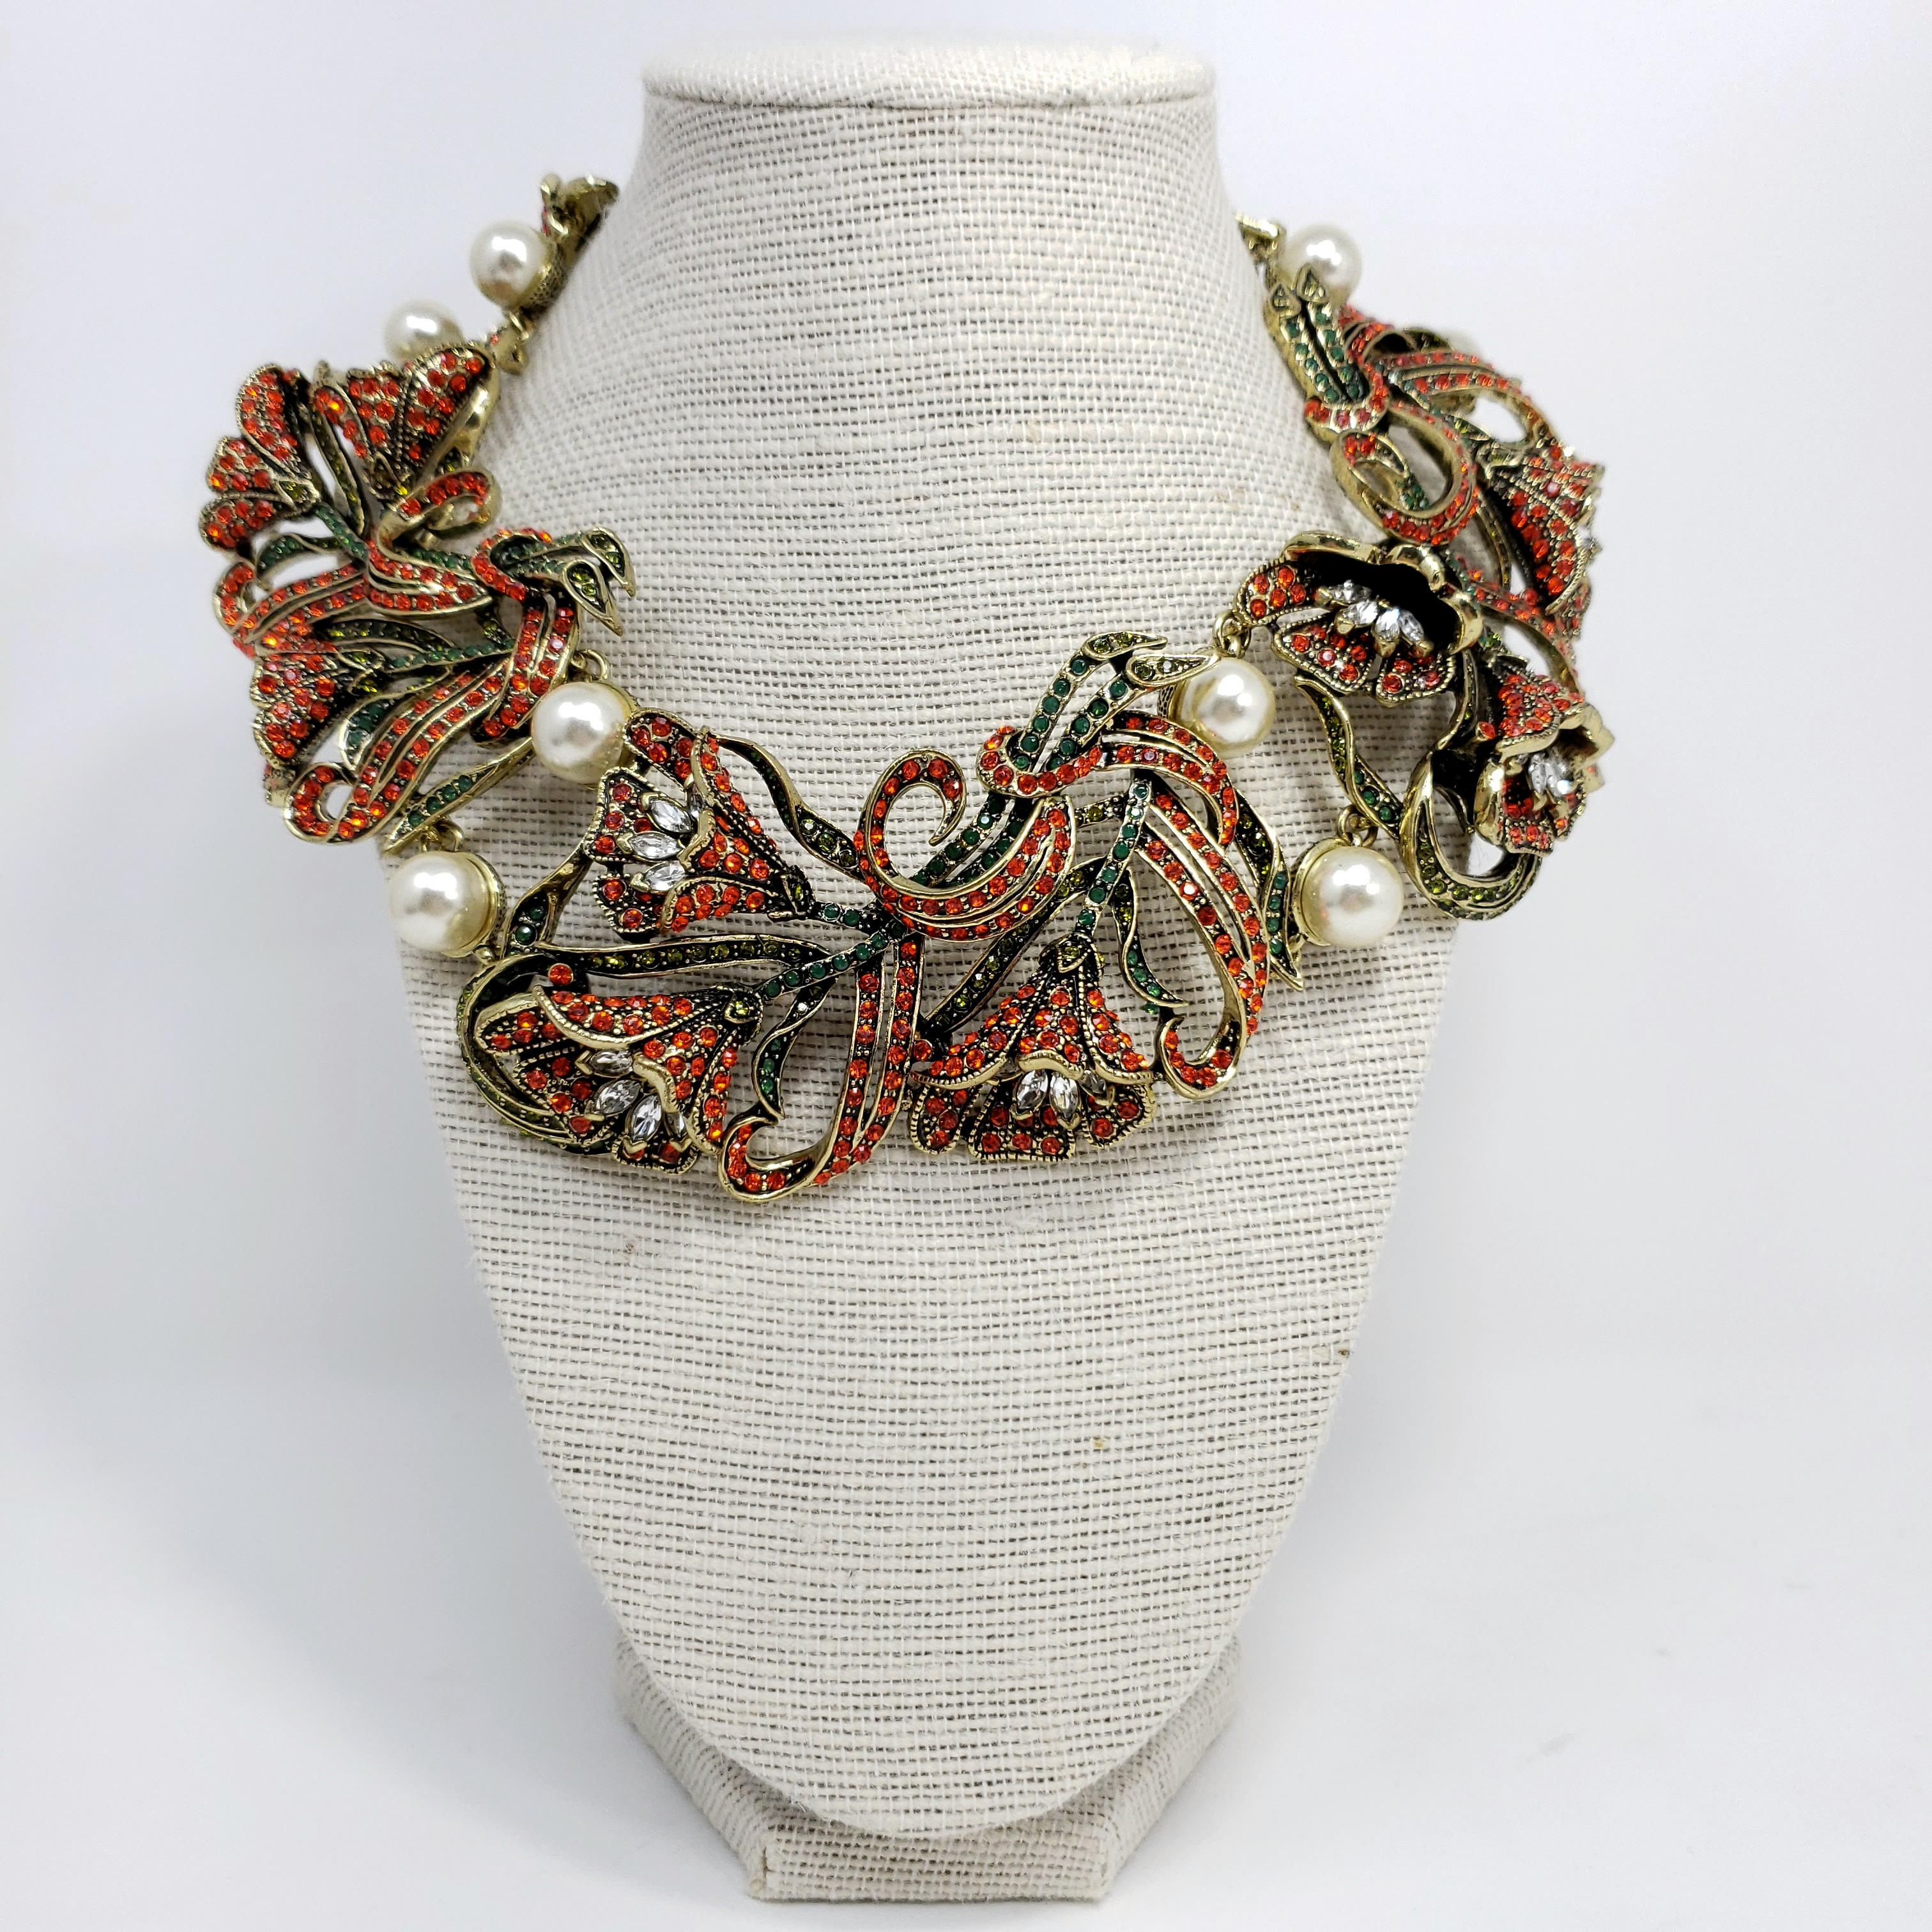 Let your jewelry wardrobe blossom with this jeweled Heidi Daus necklace. Links of extravagant, crystal-encrusted tulips decorated with pairs of faux pearls in between.

Clear, emerald, and fireopal crystals.

Length: 40 cm / 15.5 in around, plus 9